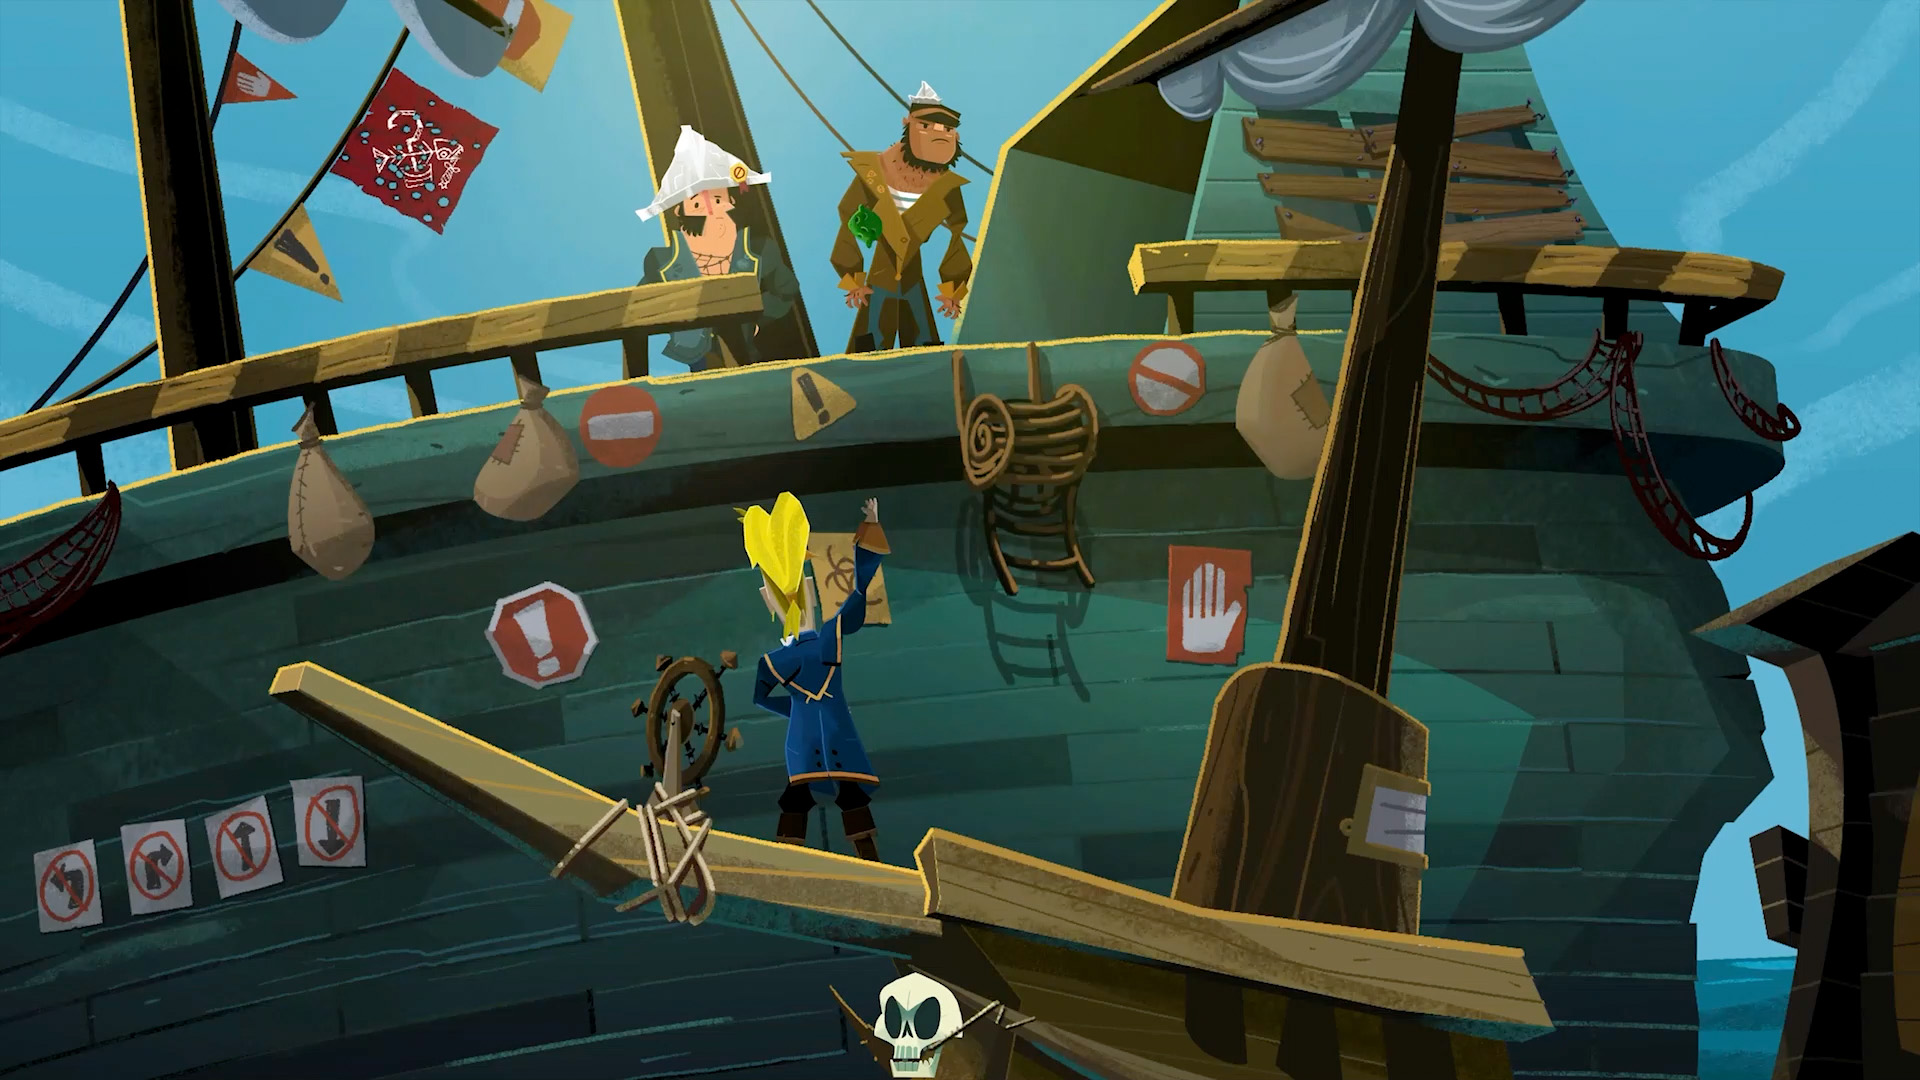 A blond pirate reaches his hand up the side of a ship in Return to Monkey Island